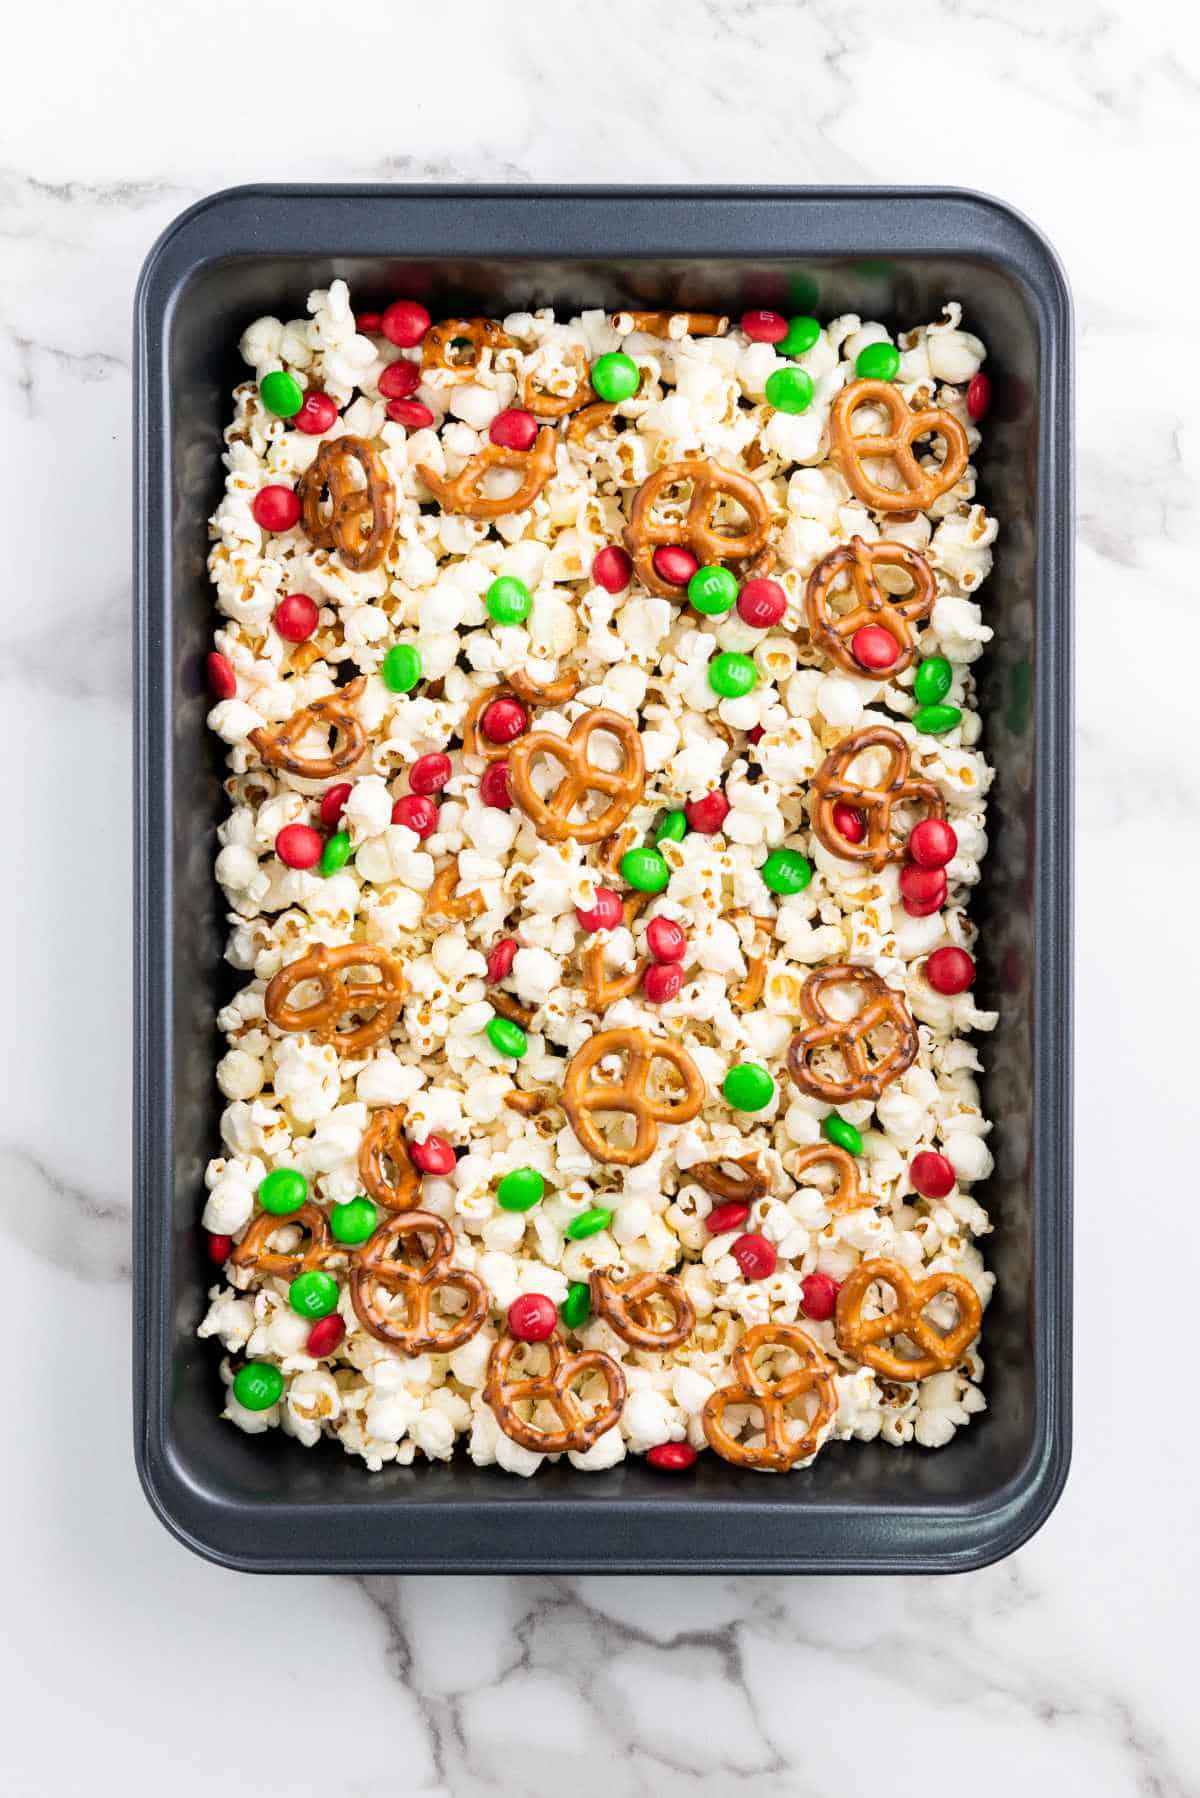 pretzel knots and holiday M&M's added snack mix in baking pan.